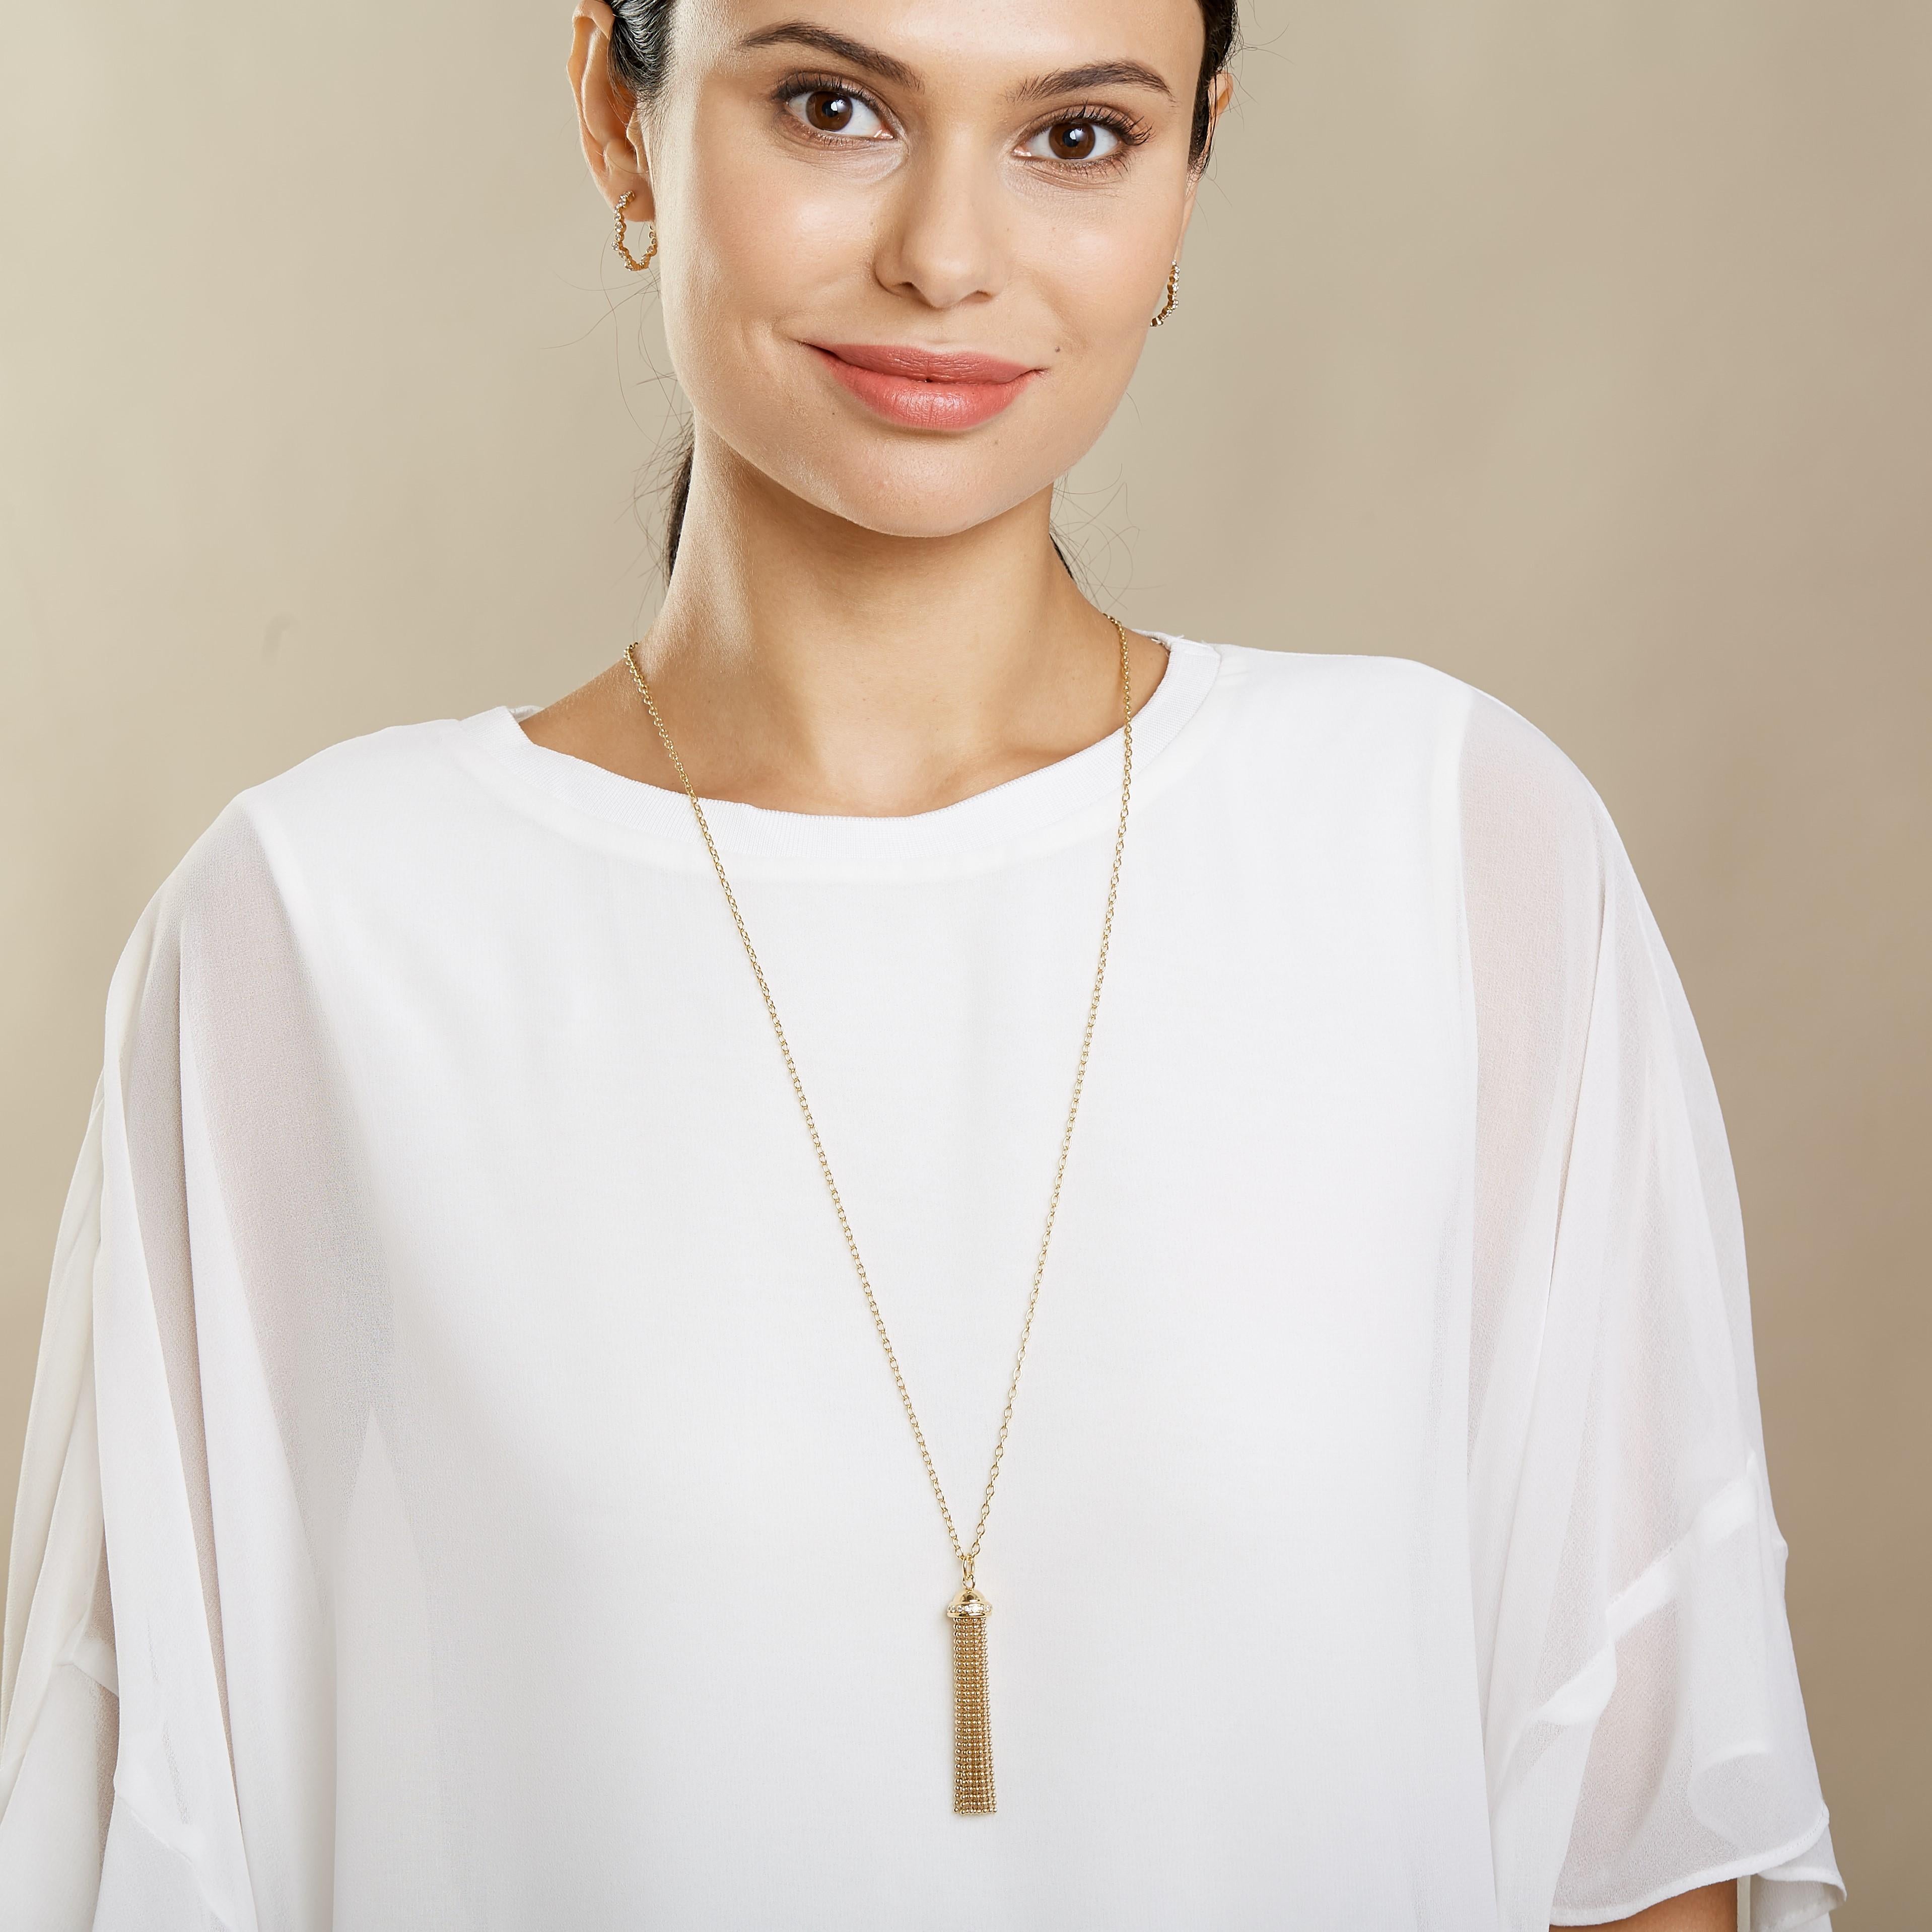 Created in 18kyg
Diamonds 0.25 cts approx
Limited edition
Chain sold separately


About the Designers ~ Dharmesh & Namrata

Drawing inspiration from little things, Dharmesh & Namrata Kothari have created an extraordinary and refreshing collection of